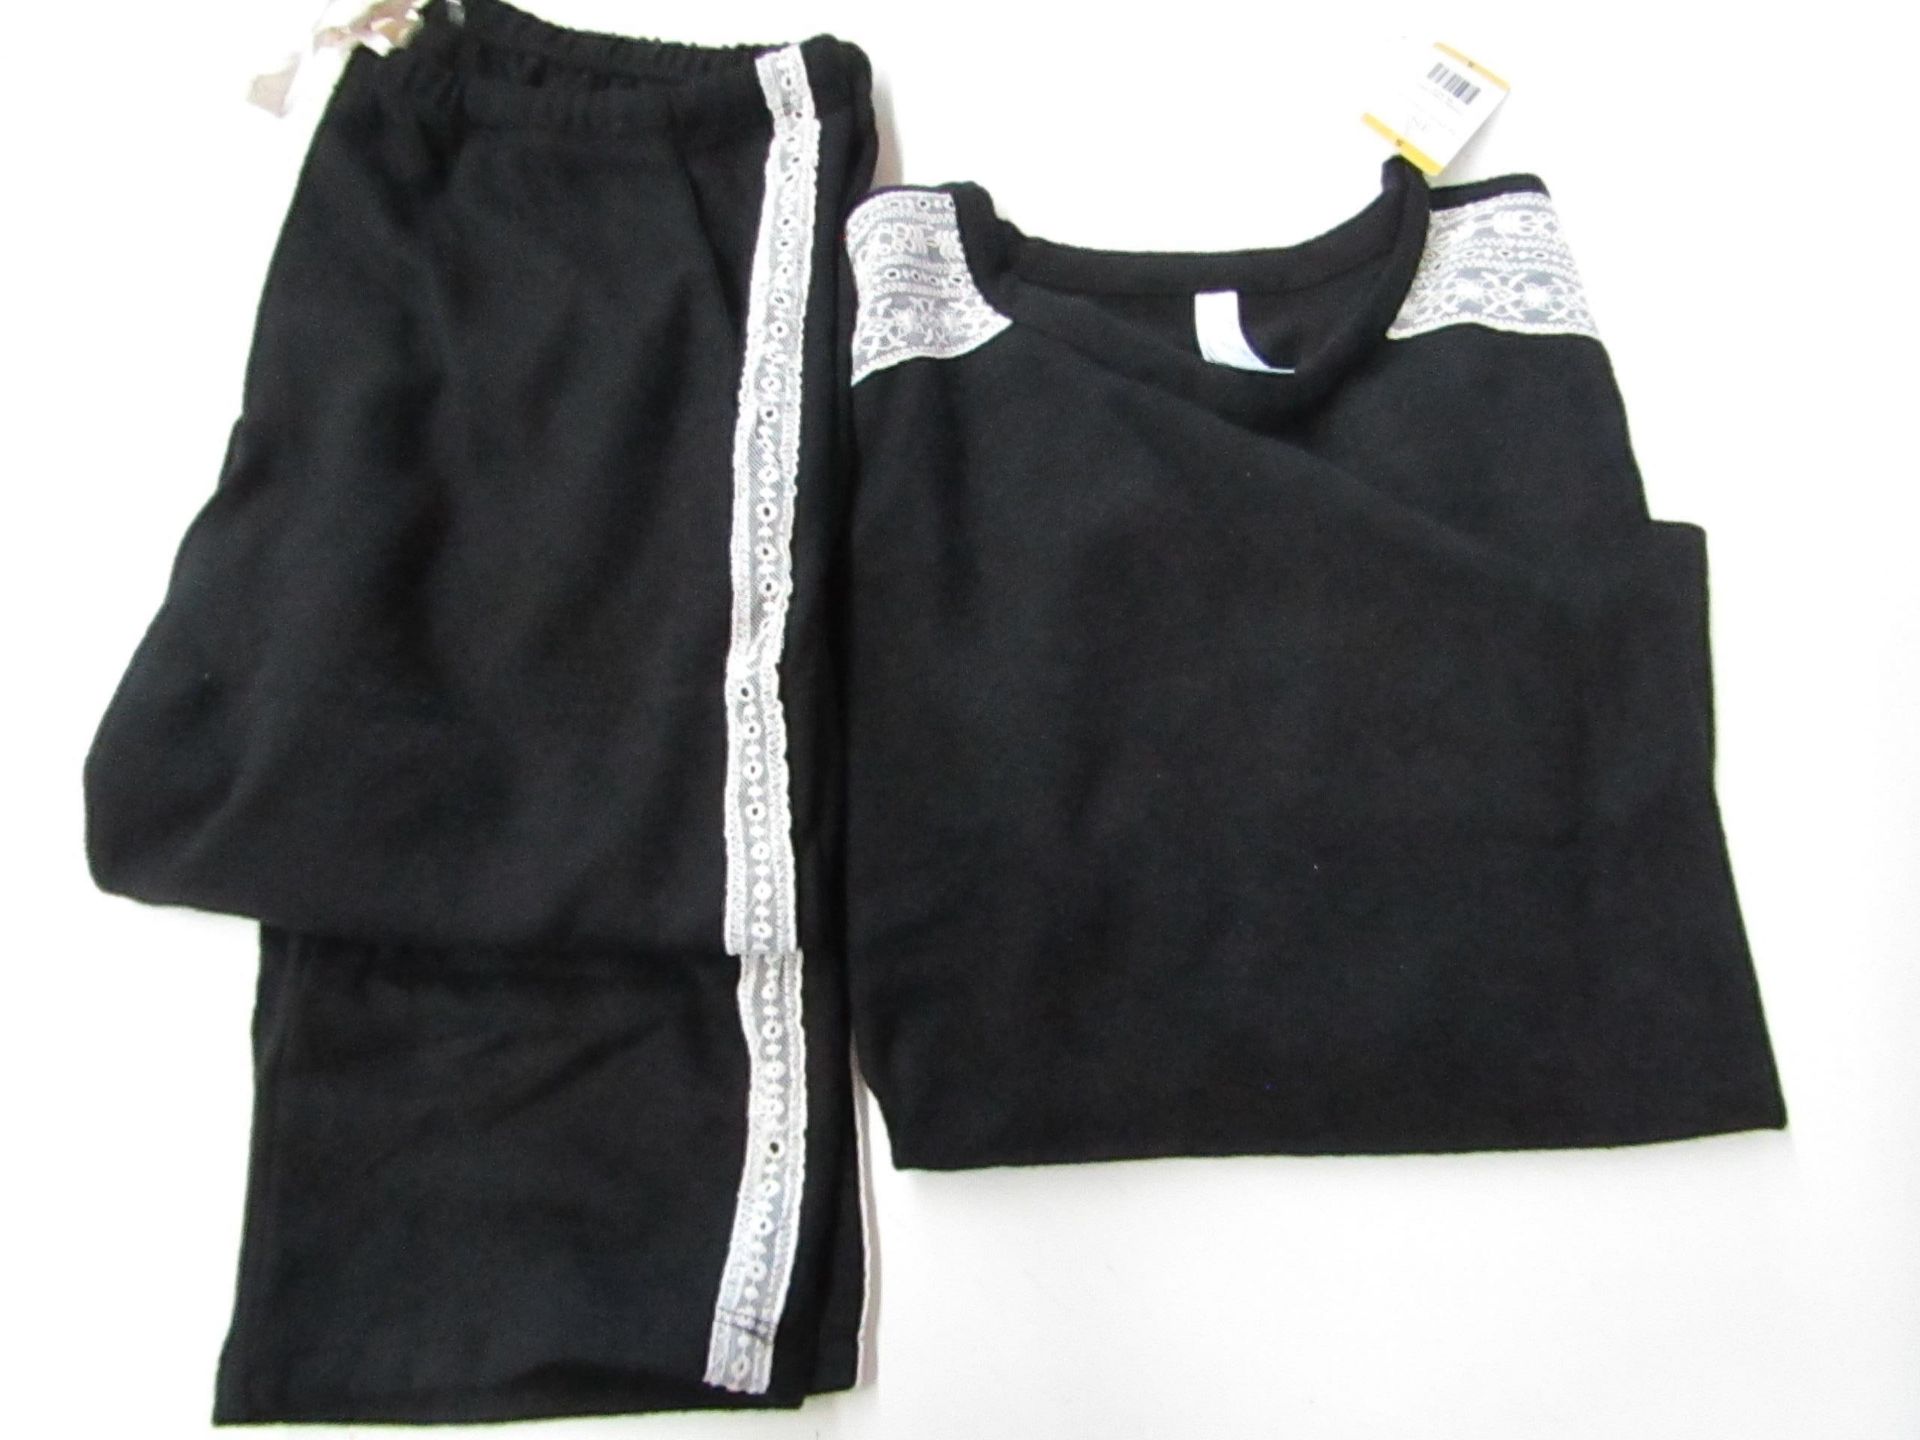 1 X Set of Flora Nikooz Ladies Lounge Sets Black With Lace Trim Size S New With Tags But Not in